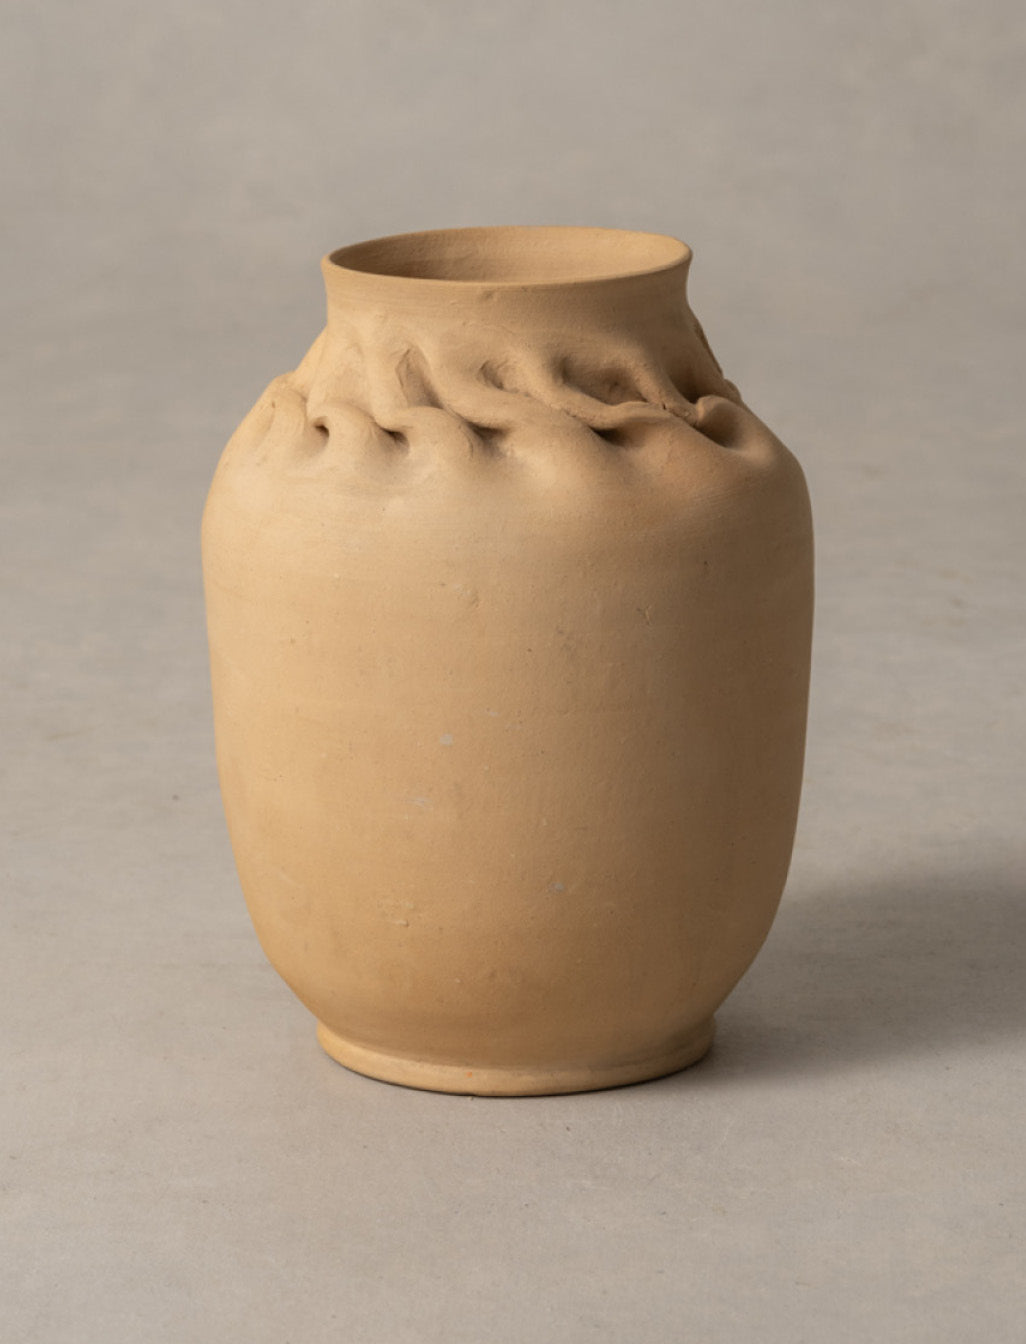 George E. Ohr, Large Buff Bisque Vase with In-Body Twist, circa 1898-1910 (GOEA02)